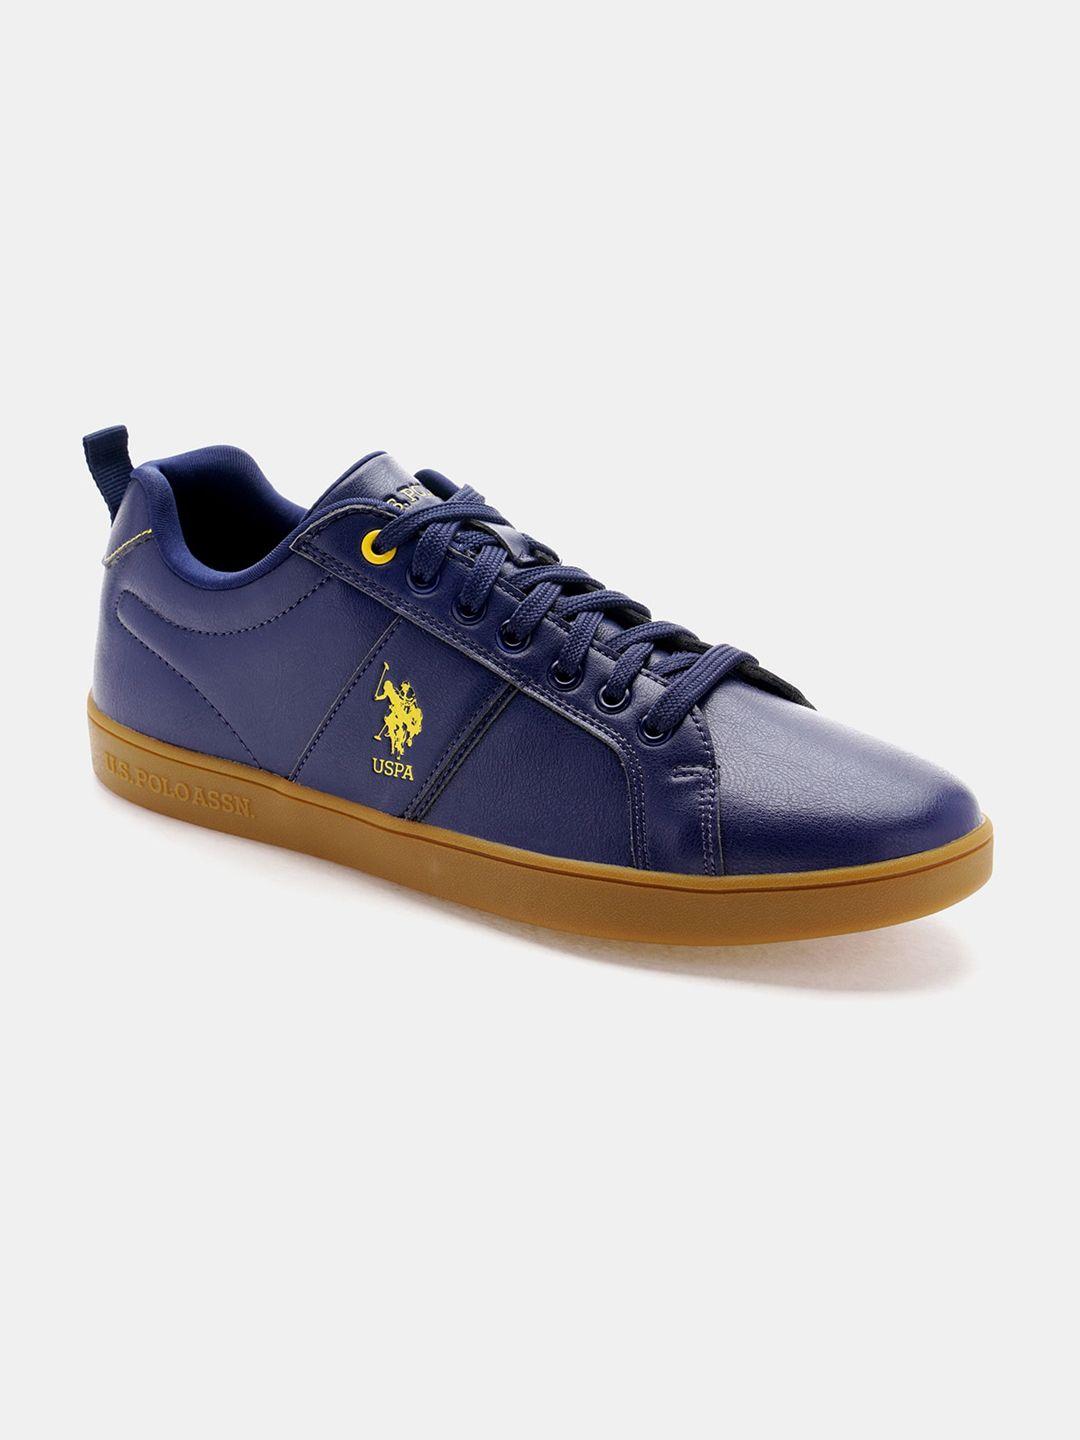 u.s. polo assn. men round toe lace up sneakers